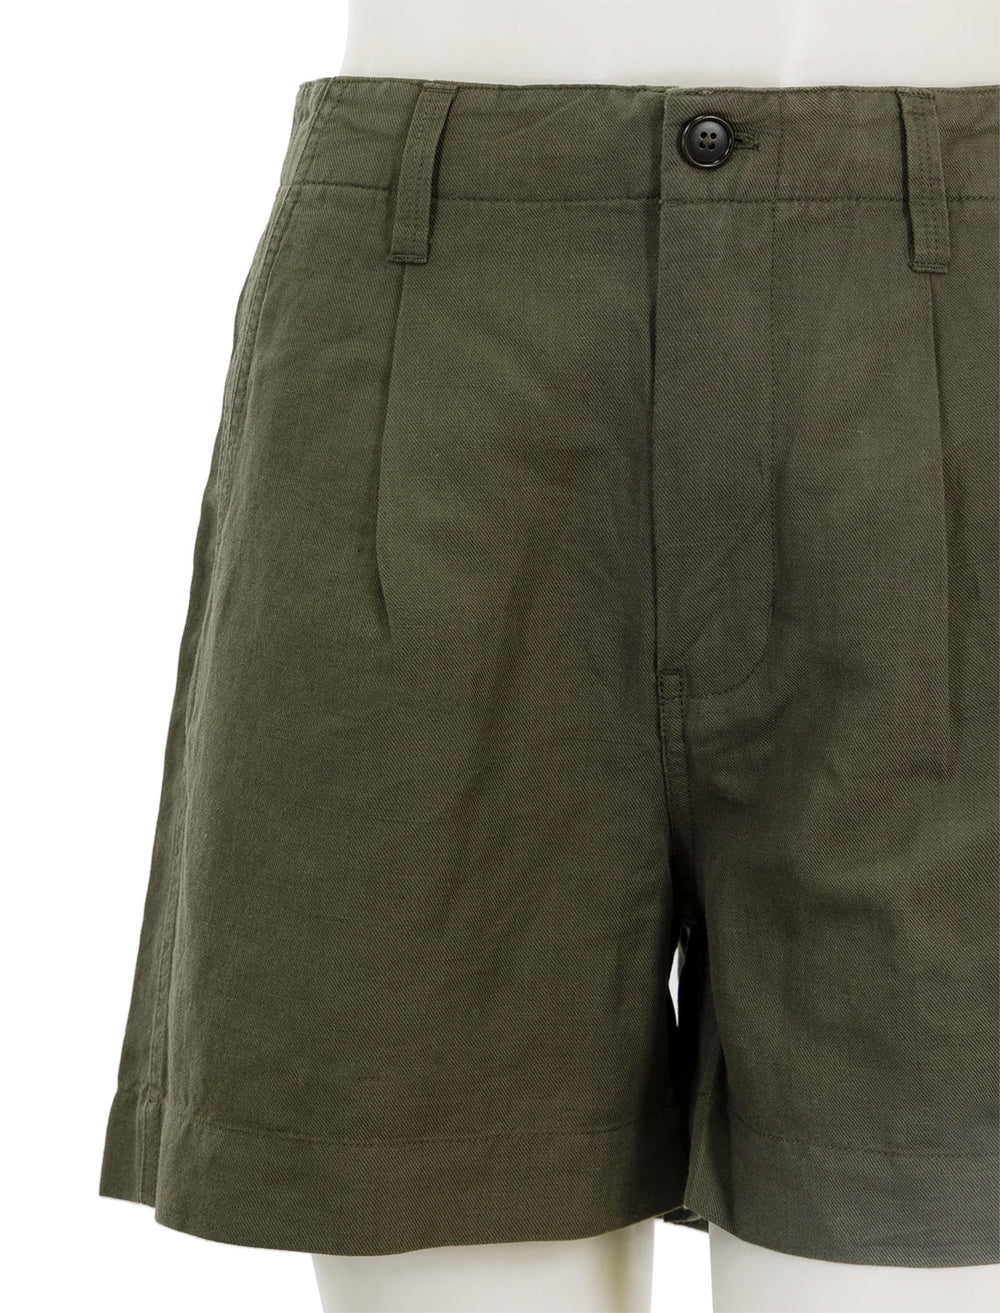 Close-up view of Alex Mill's pleated twill shorts in pulgia olive.